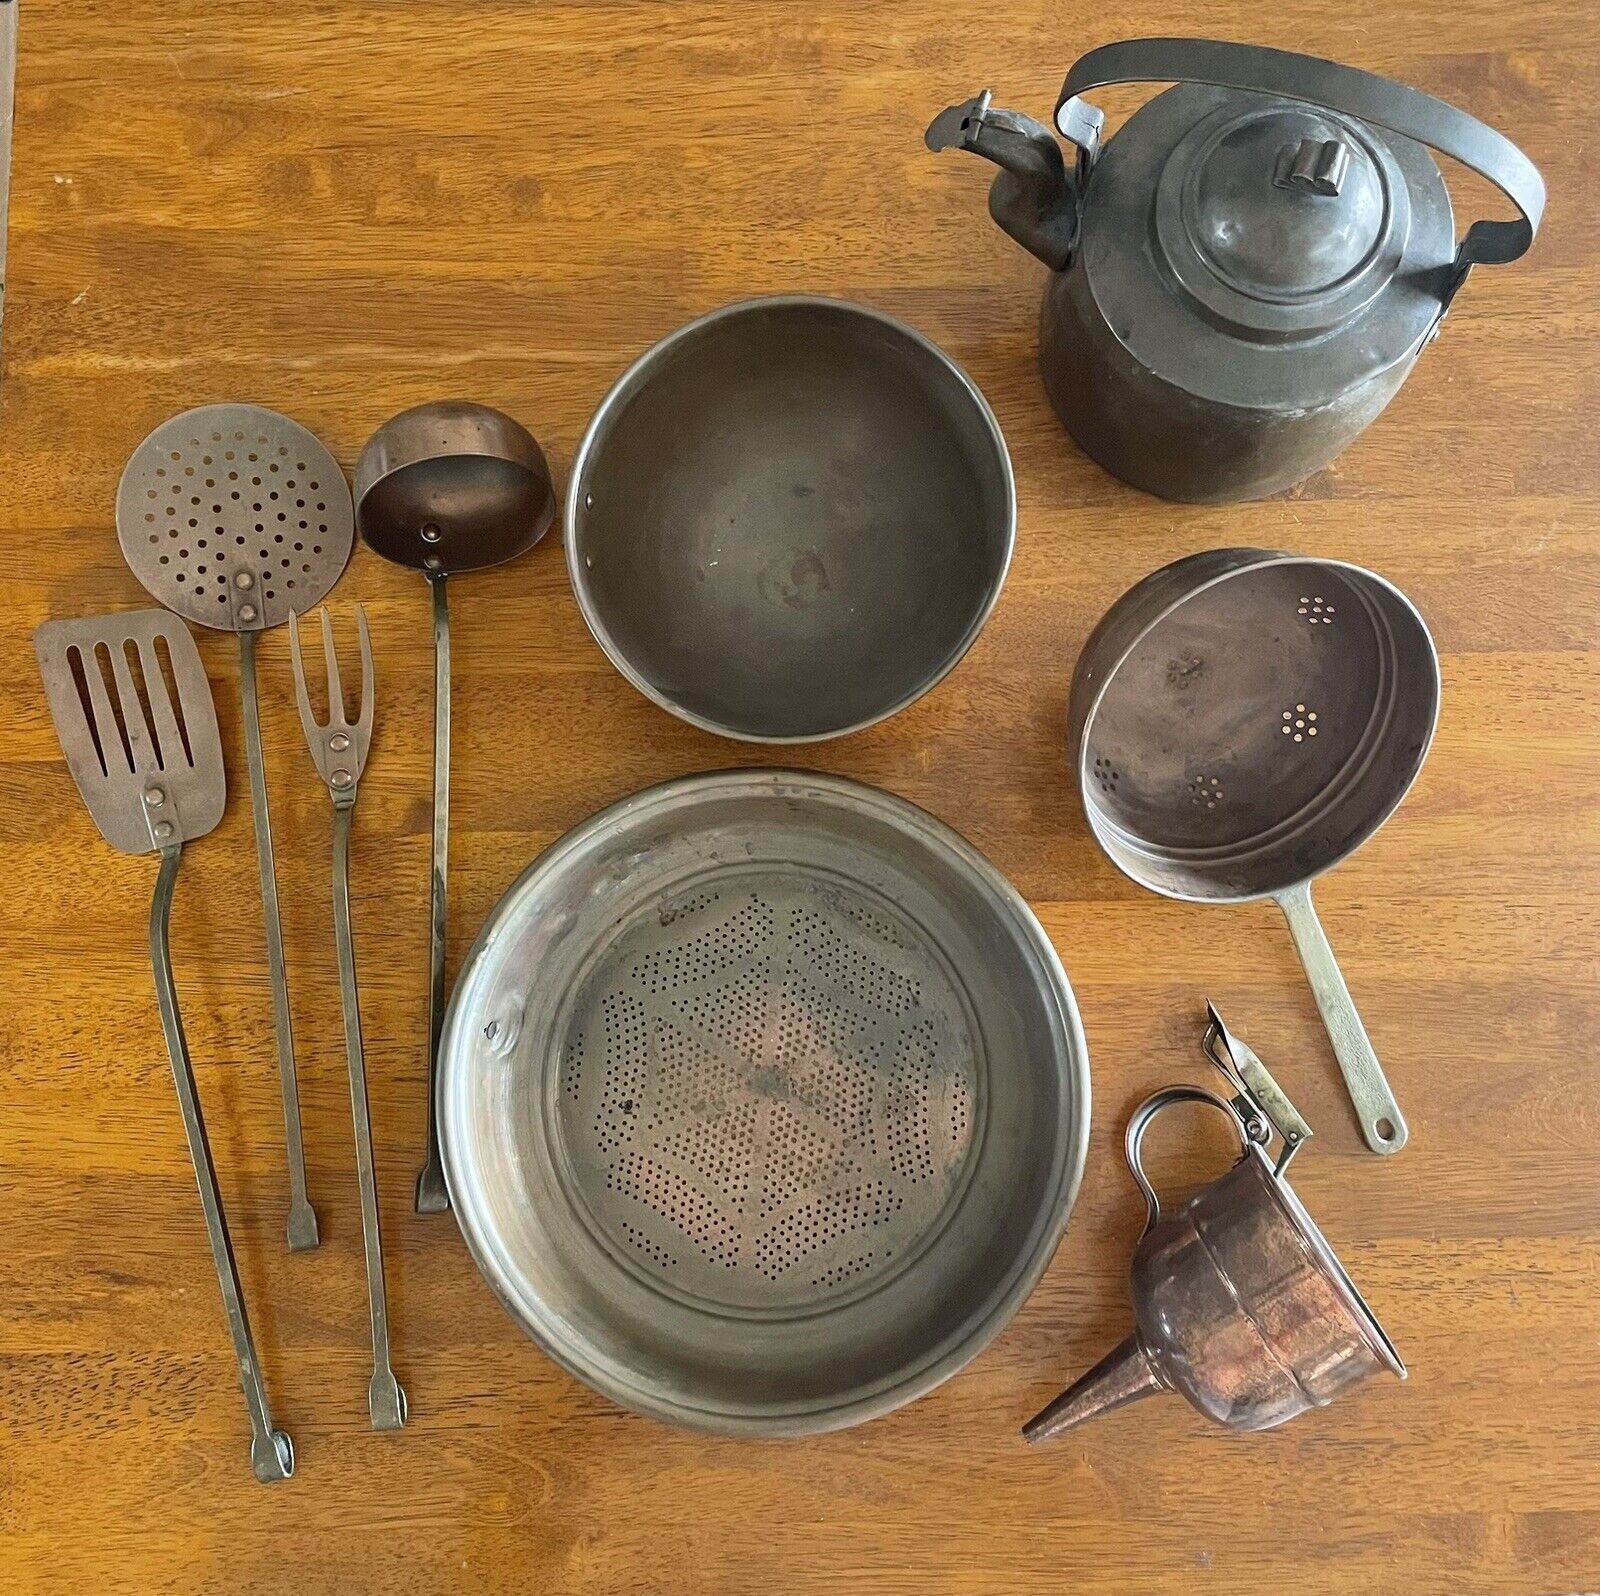 Copper Cooking Collection 9 Items Nice Patina - Look At Pictures $225+ Value